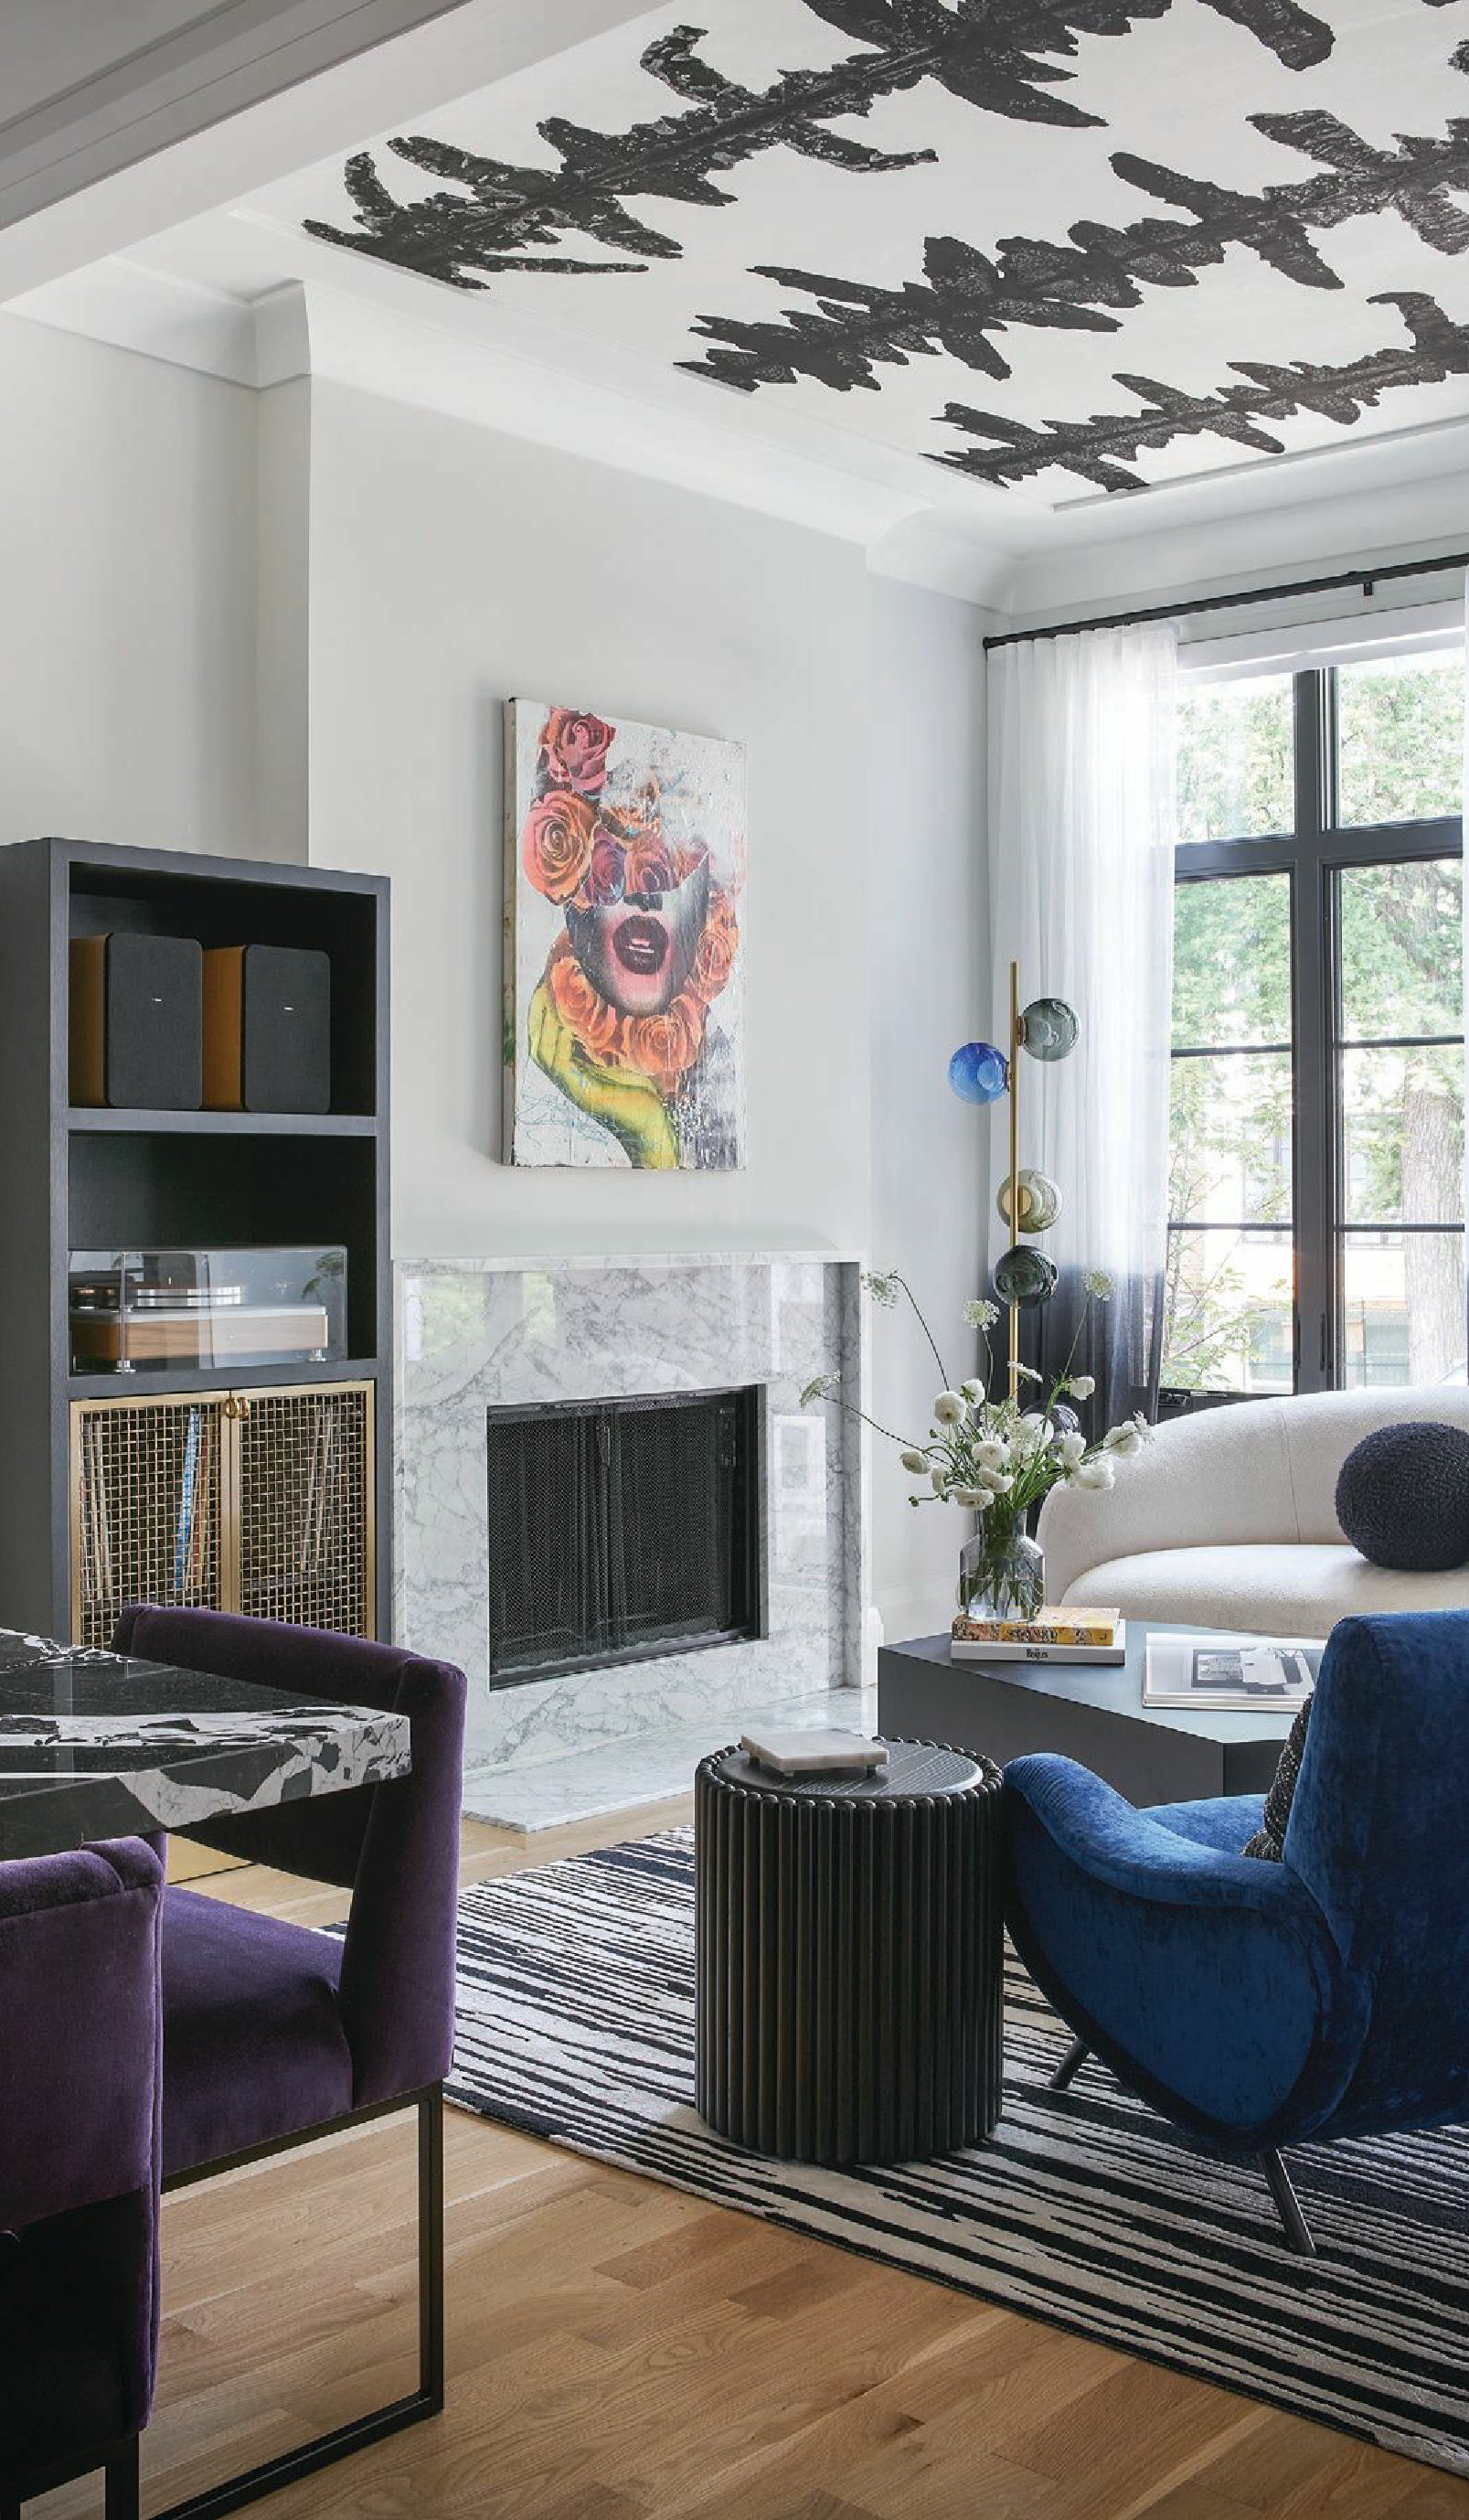 Custom handpainted Porter Teleo wallpaper on the ceiling adds an edgy
accent that, when paired with a chic Bocci lamp and unique art from Dain NYC,
brings this living room to life. PHOTOGRAPHED BY RYAN MCDONALD